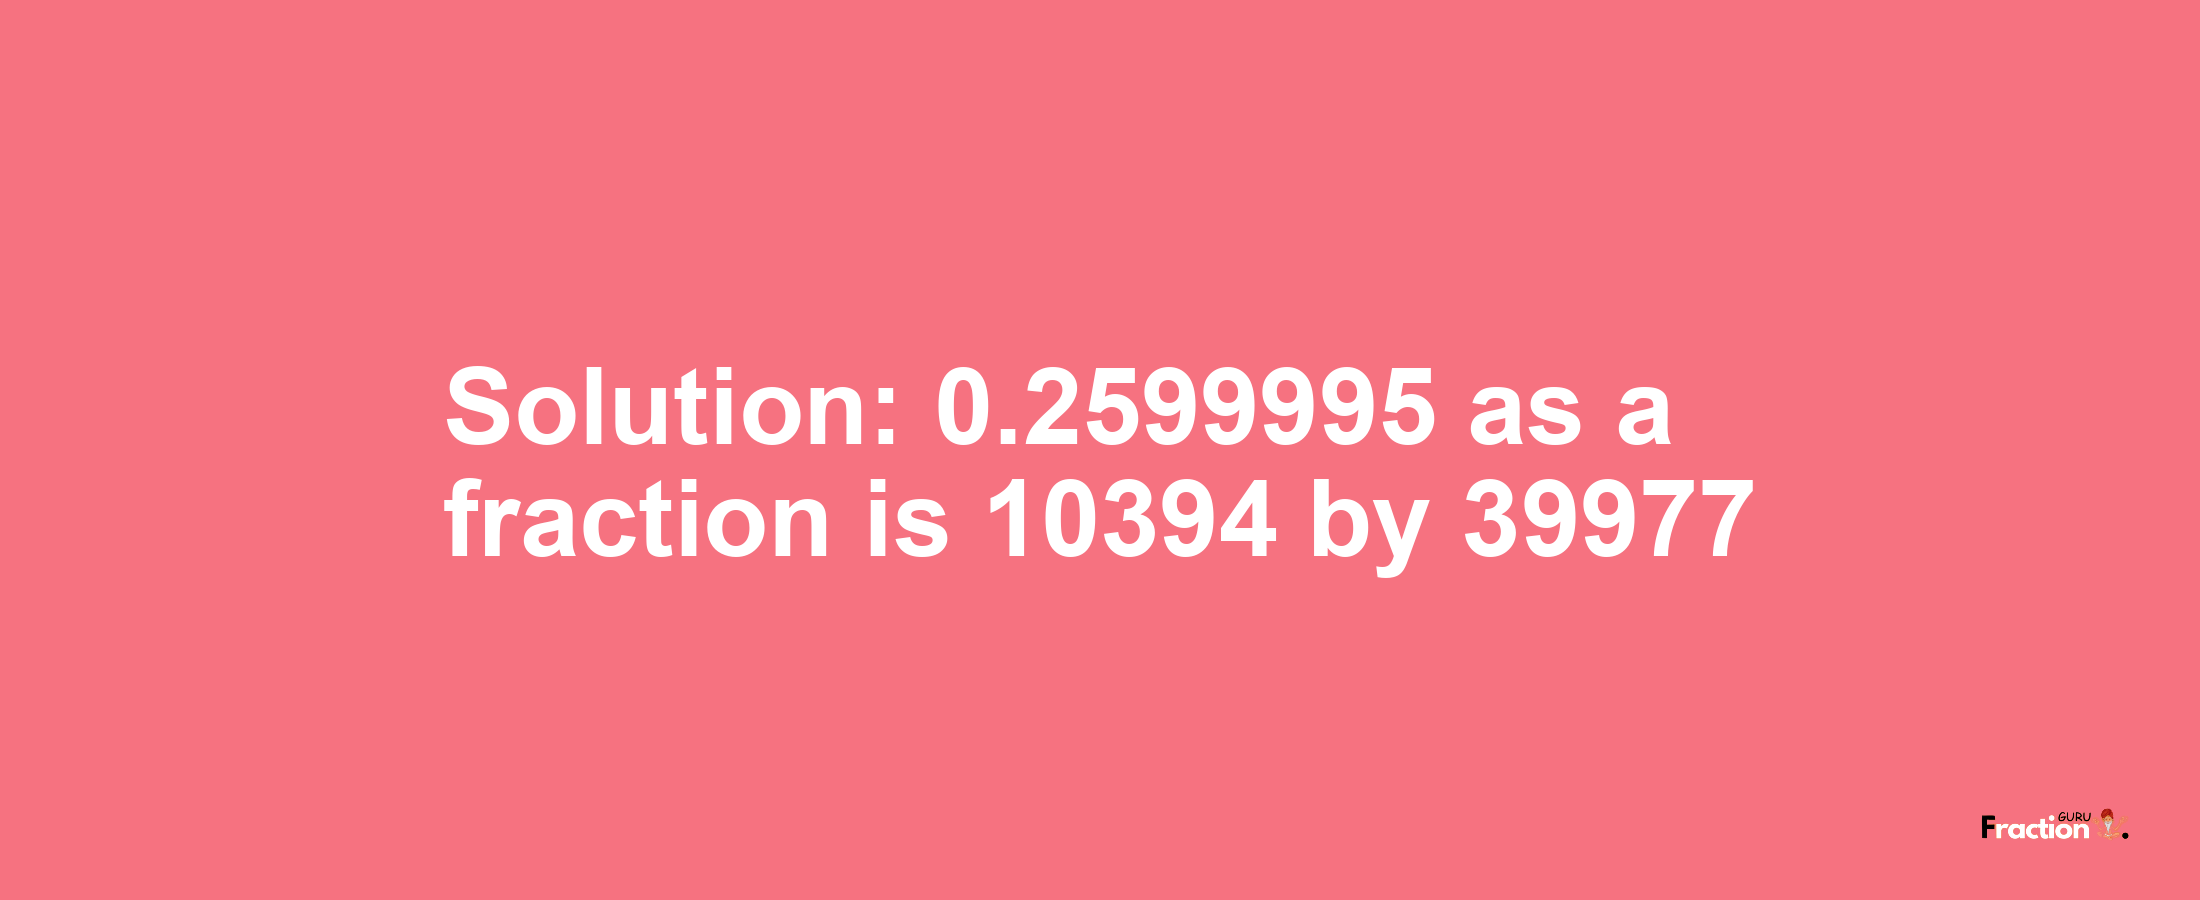 Solution:0.2599995 as a fraction is 10394/39977